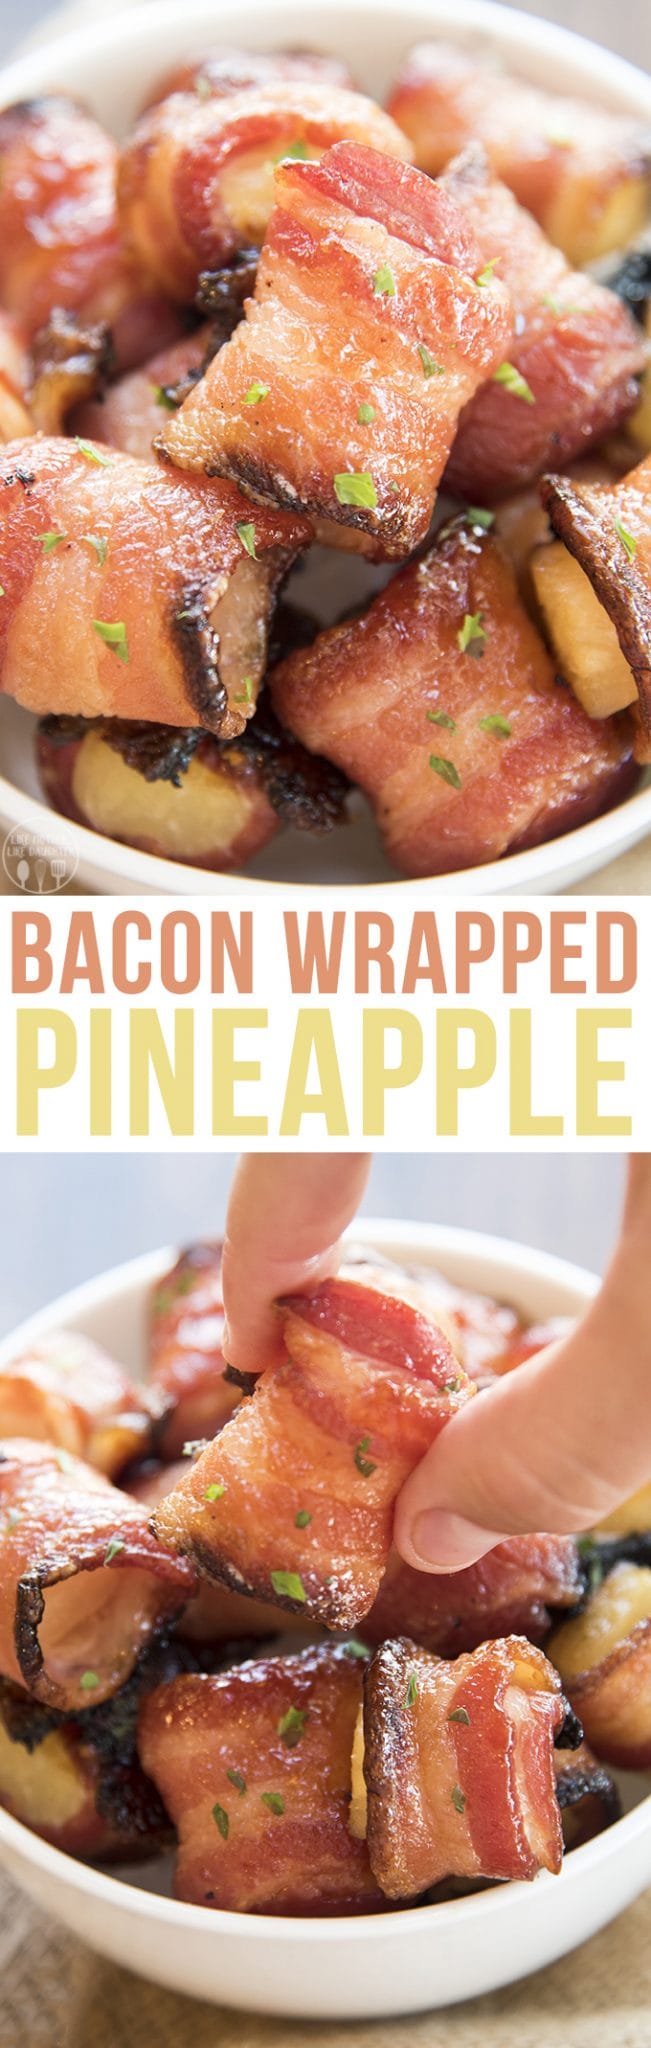 These sweet bacon wrapped pineapple bites are baked to crispy sweet perfection. They're a perfect game day appetizer!